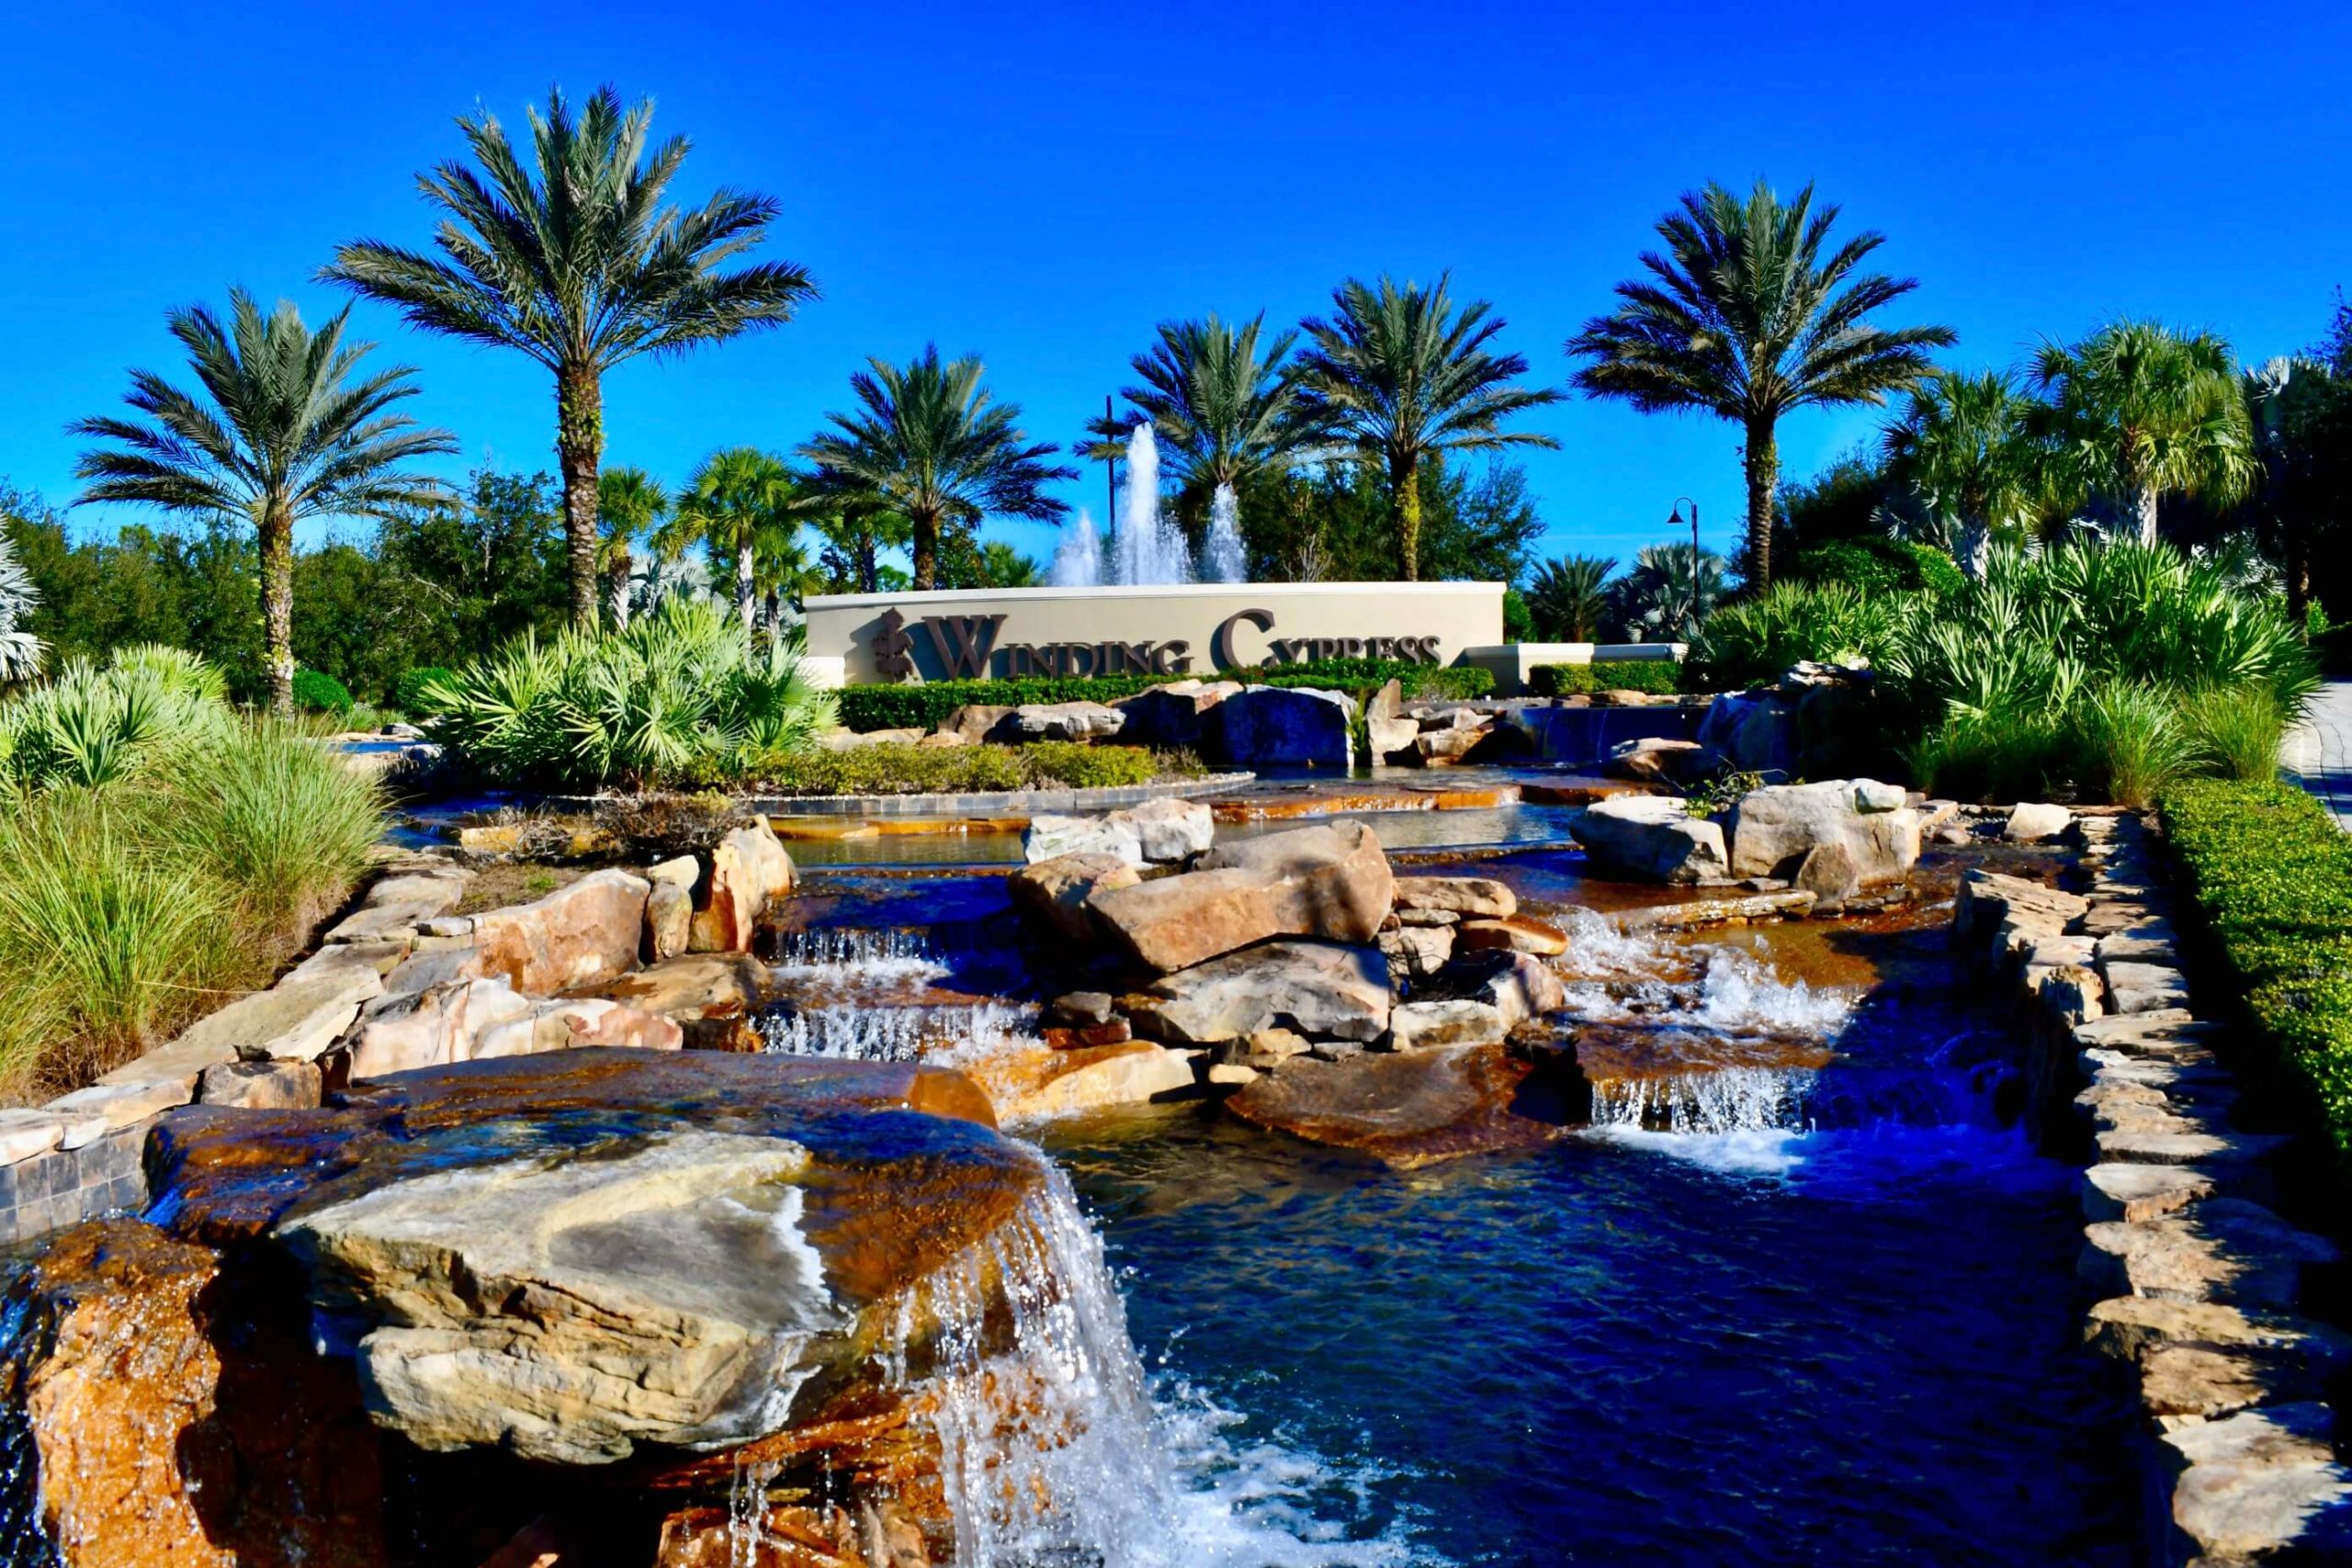 Beautiful Waterfall Feature to Winding Cypress in Naples, FL